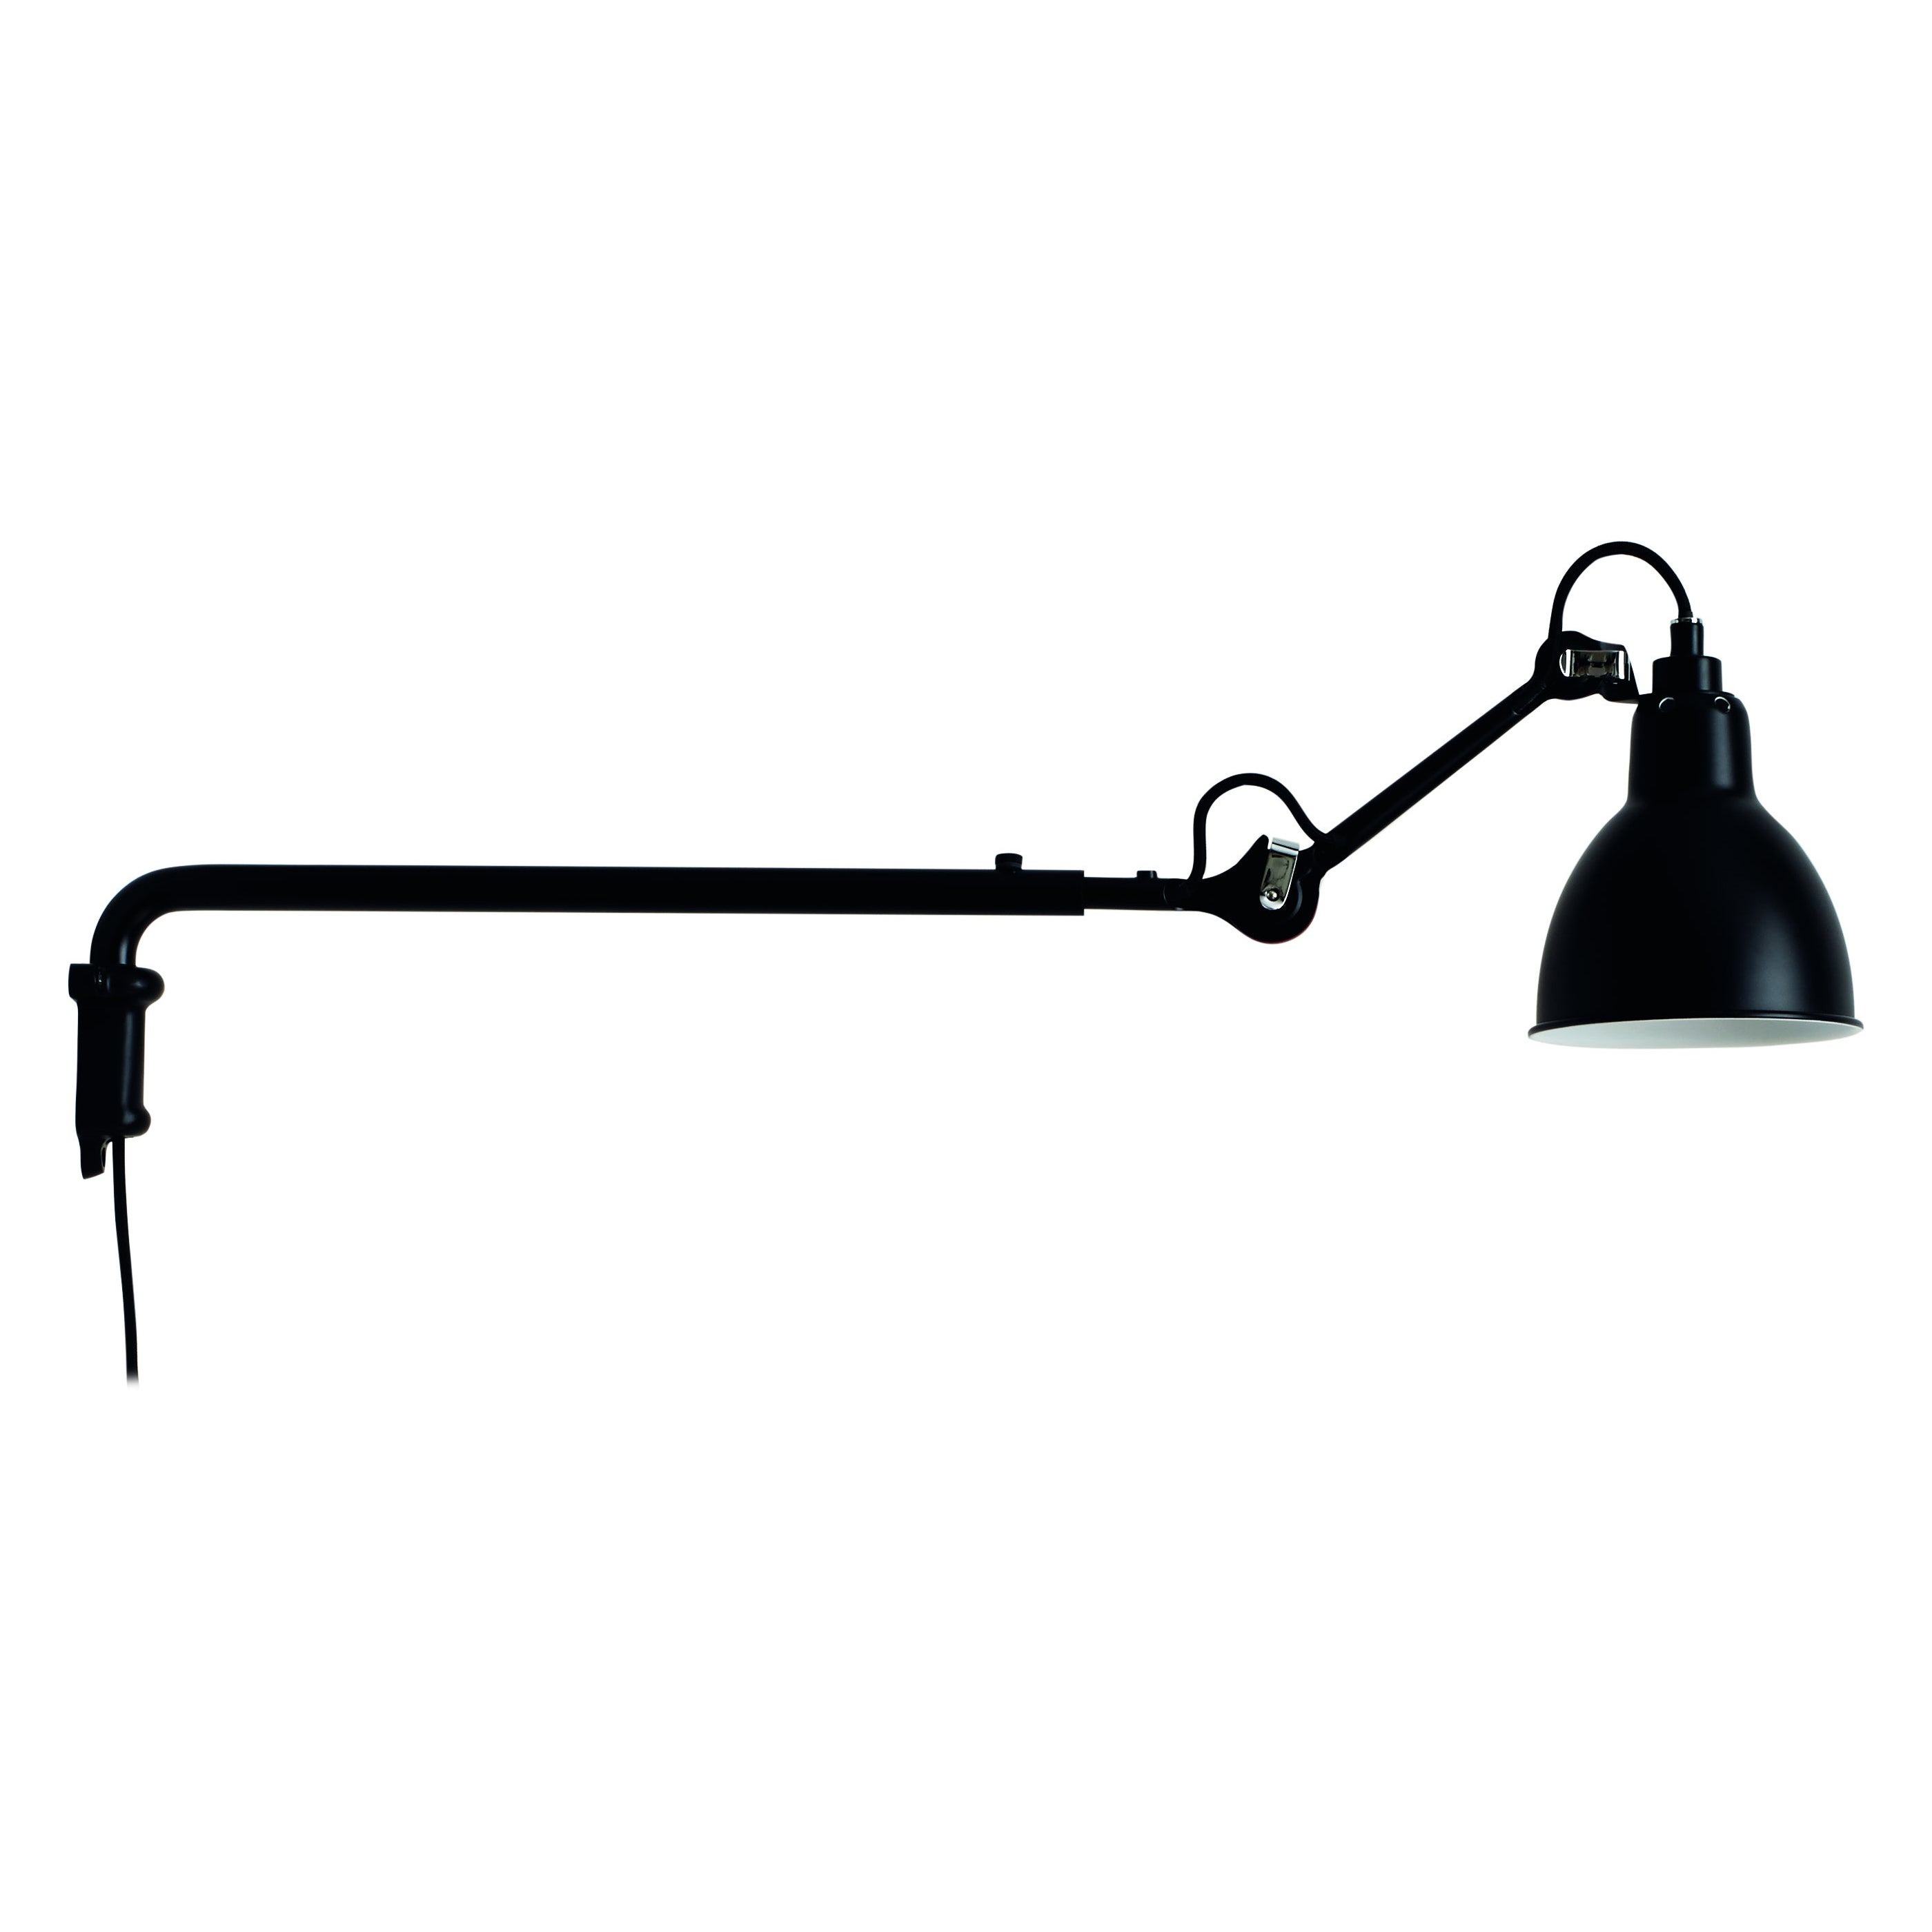 DCW Editions La Lampe Gras N°203 Wall Lamp in Black Steel Arm and Black Shade For Sale